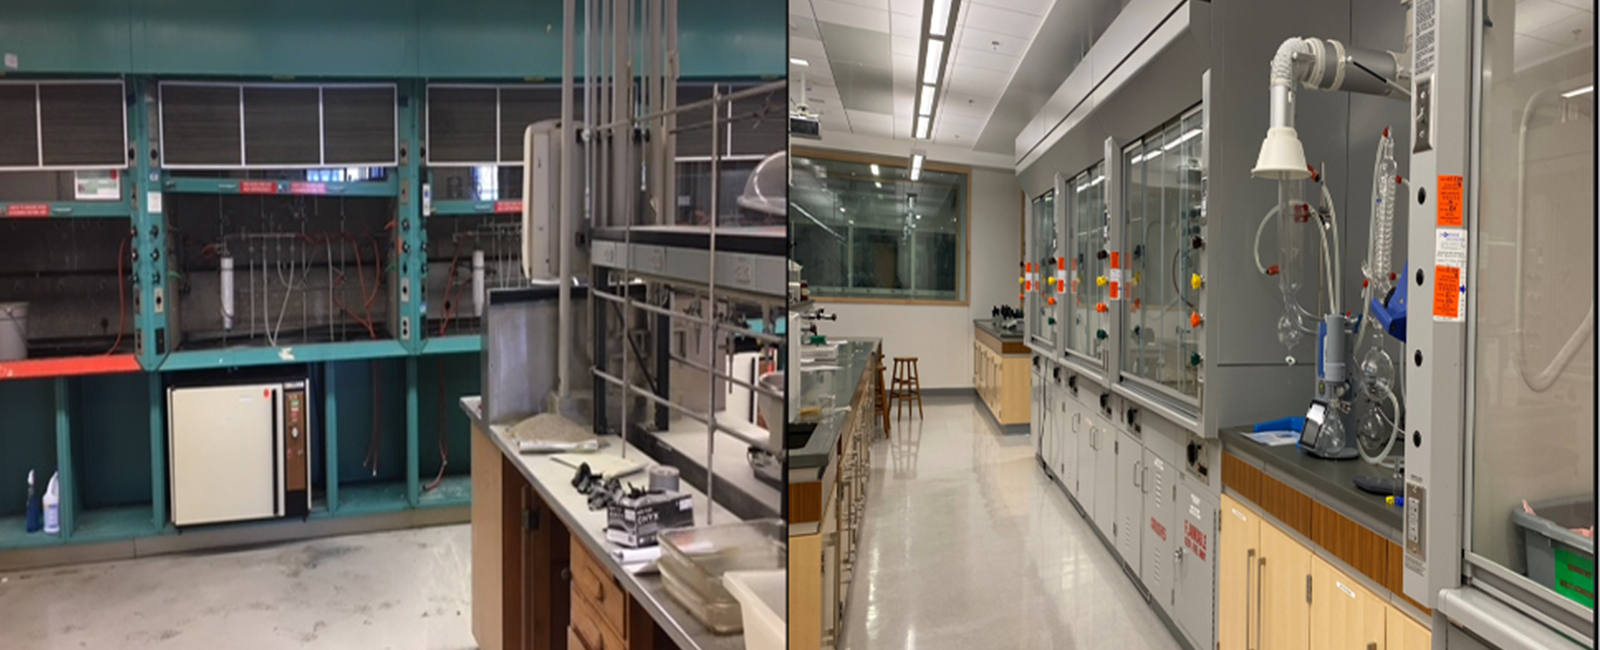 A split image depicting the old lab on the left and the new lab on the right.